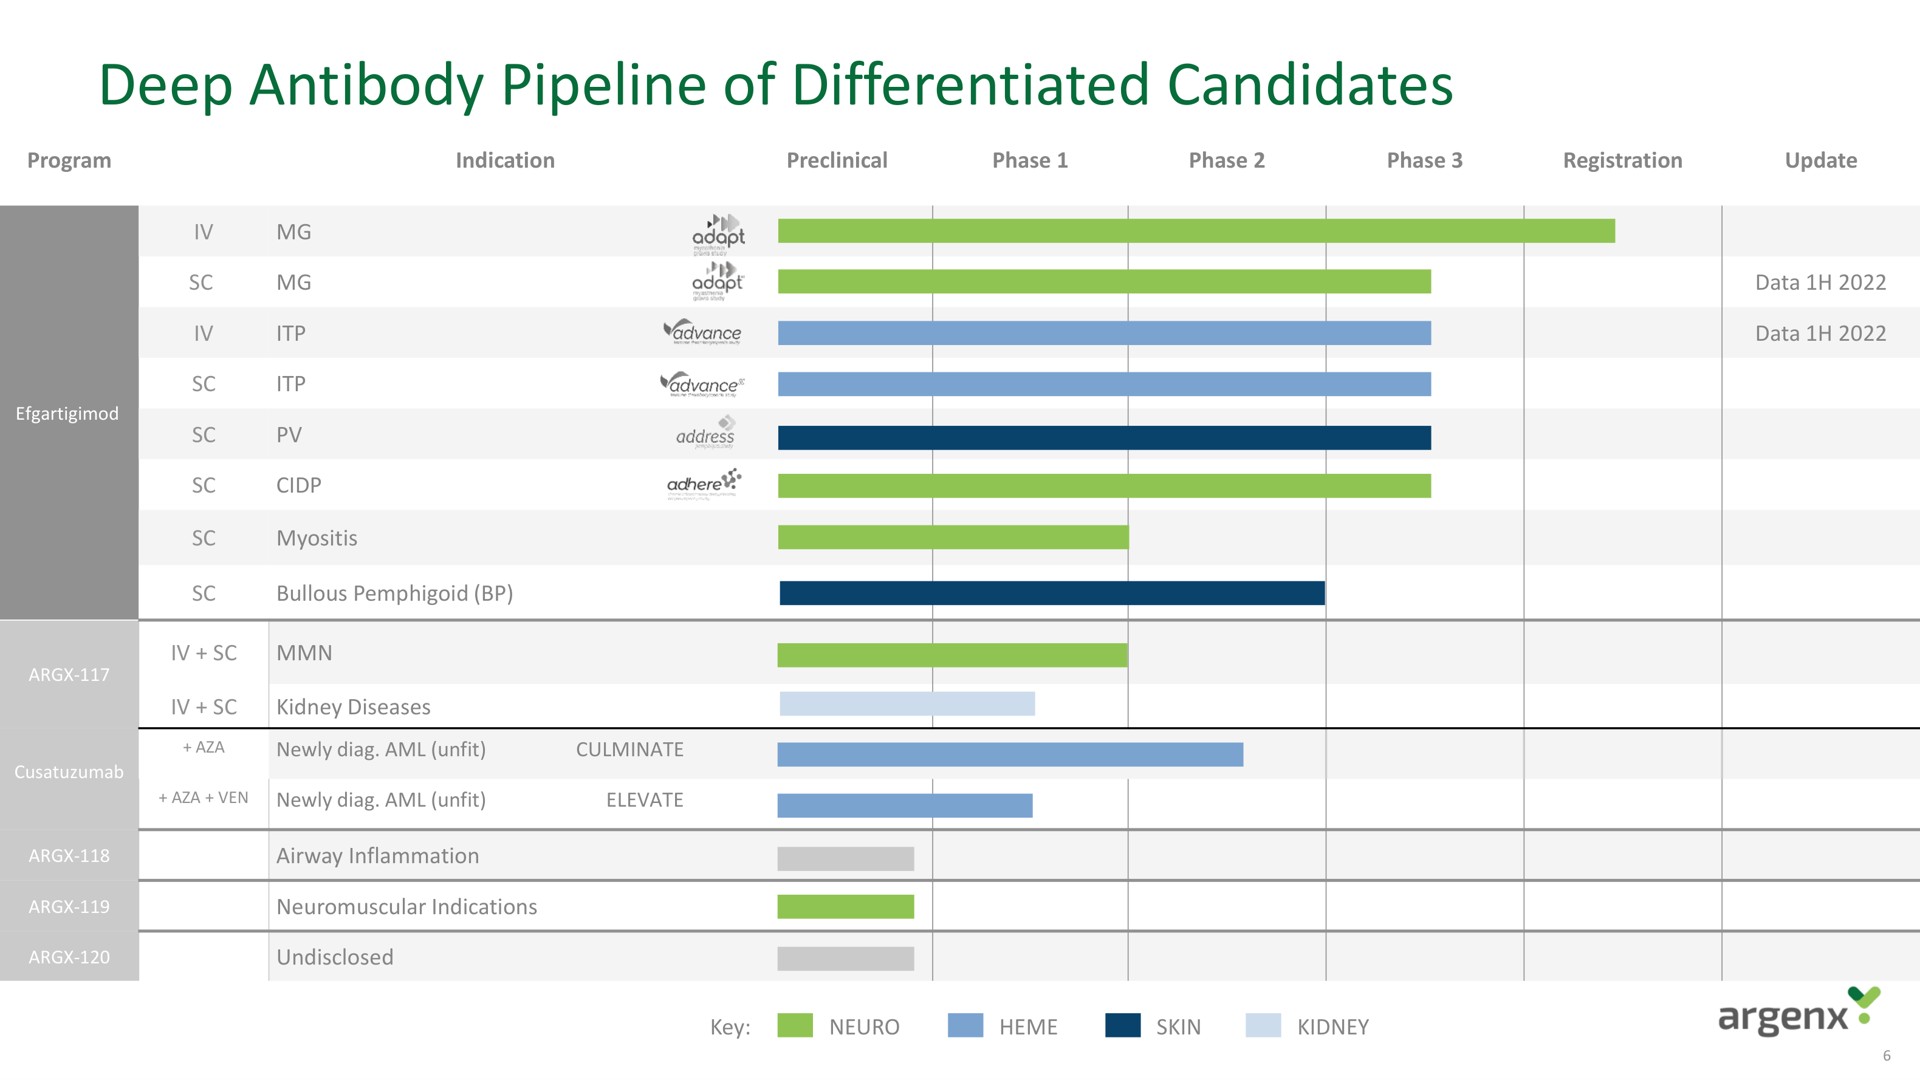 deep antibody pipeline of differentiated candidates data | argenx SE